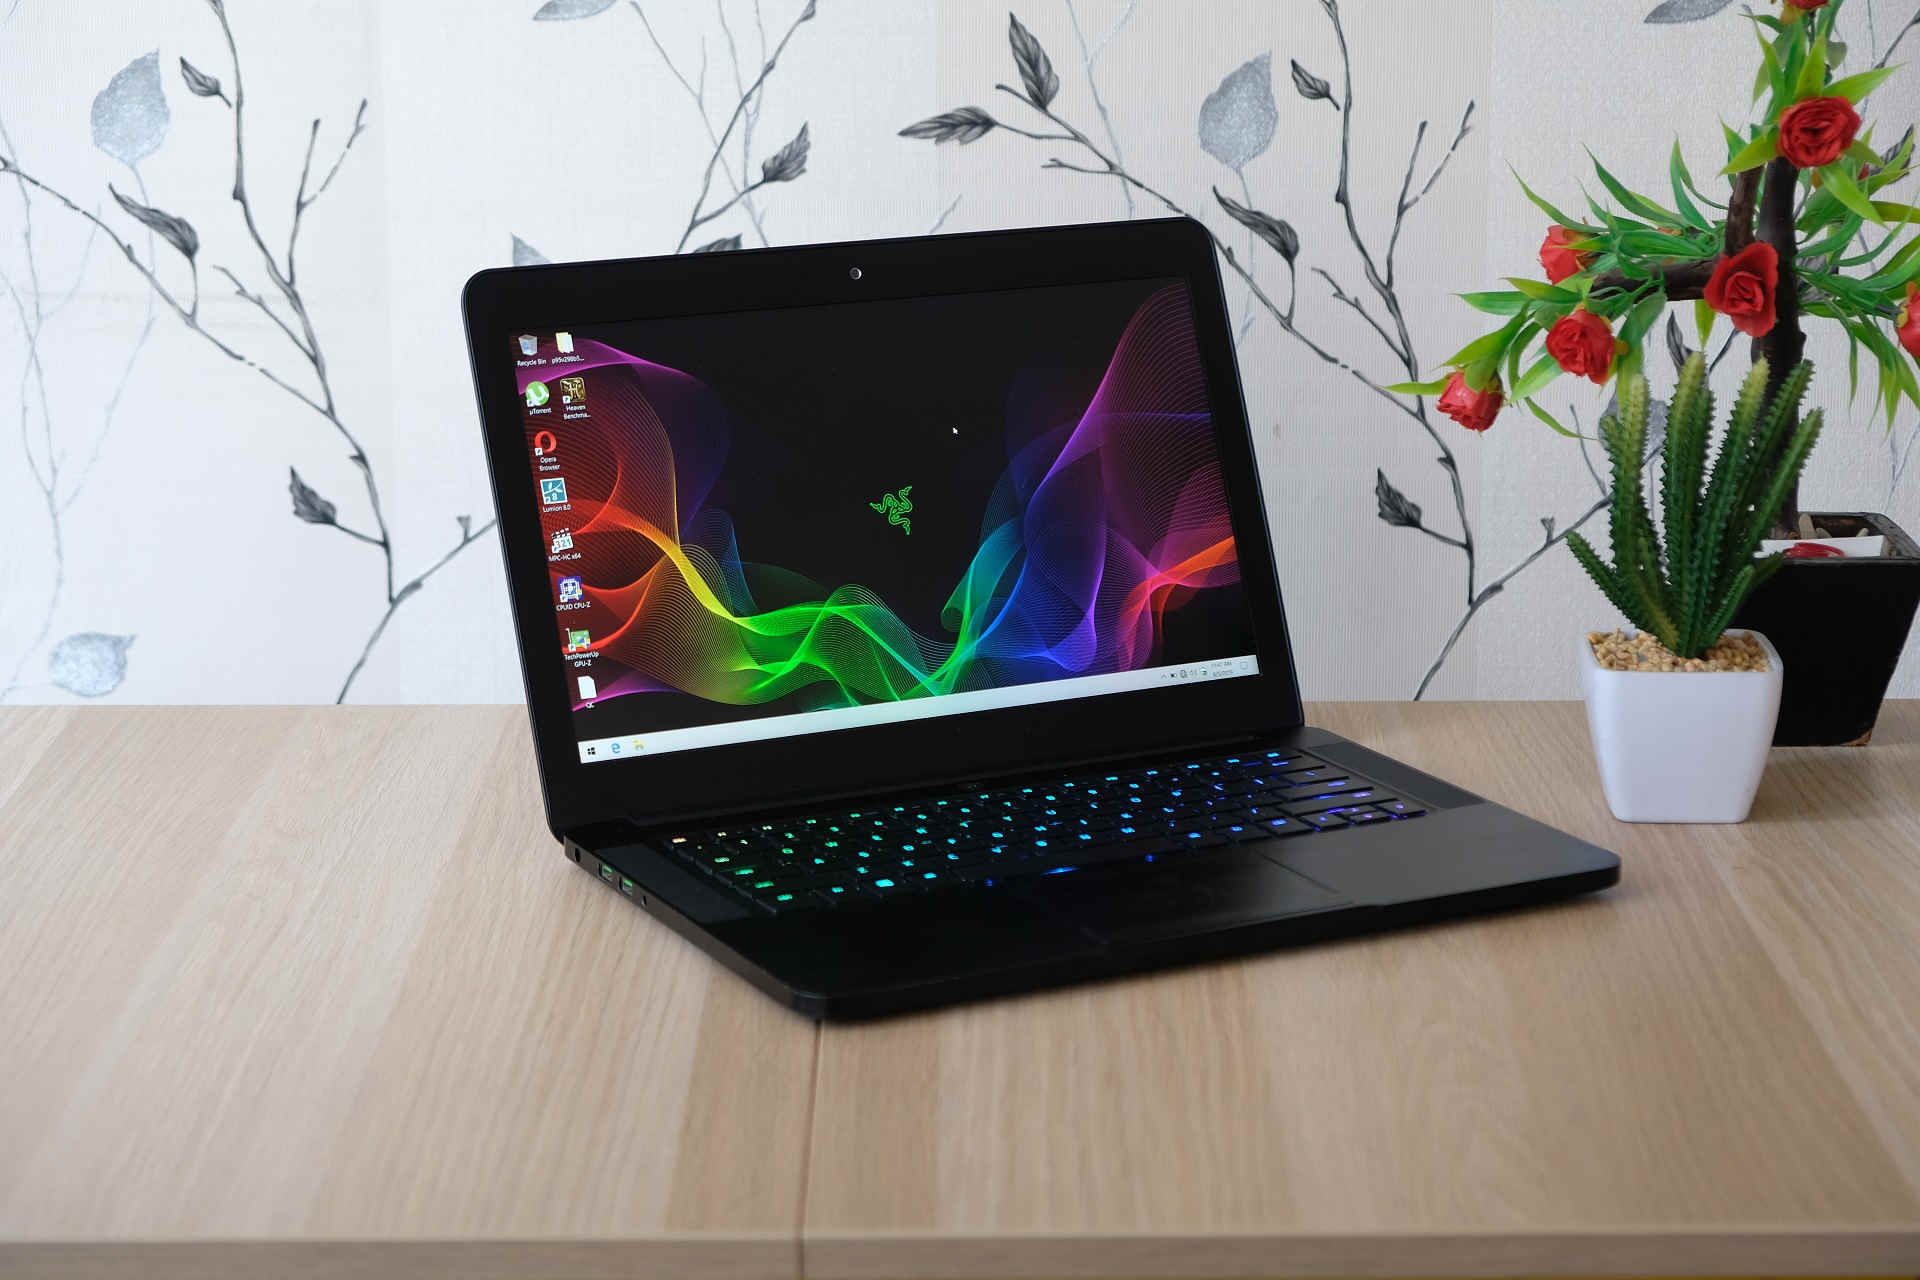 What are the best Razer laptops for gaming